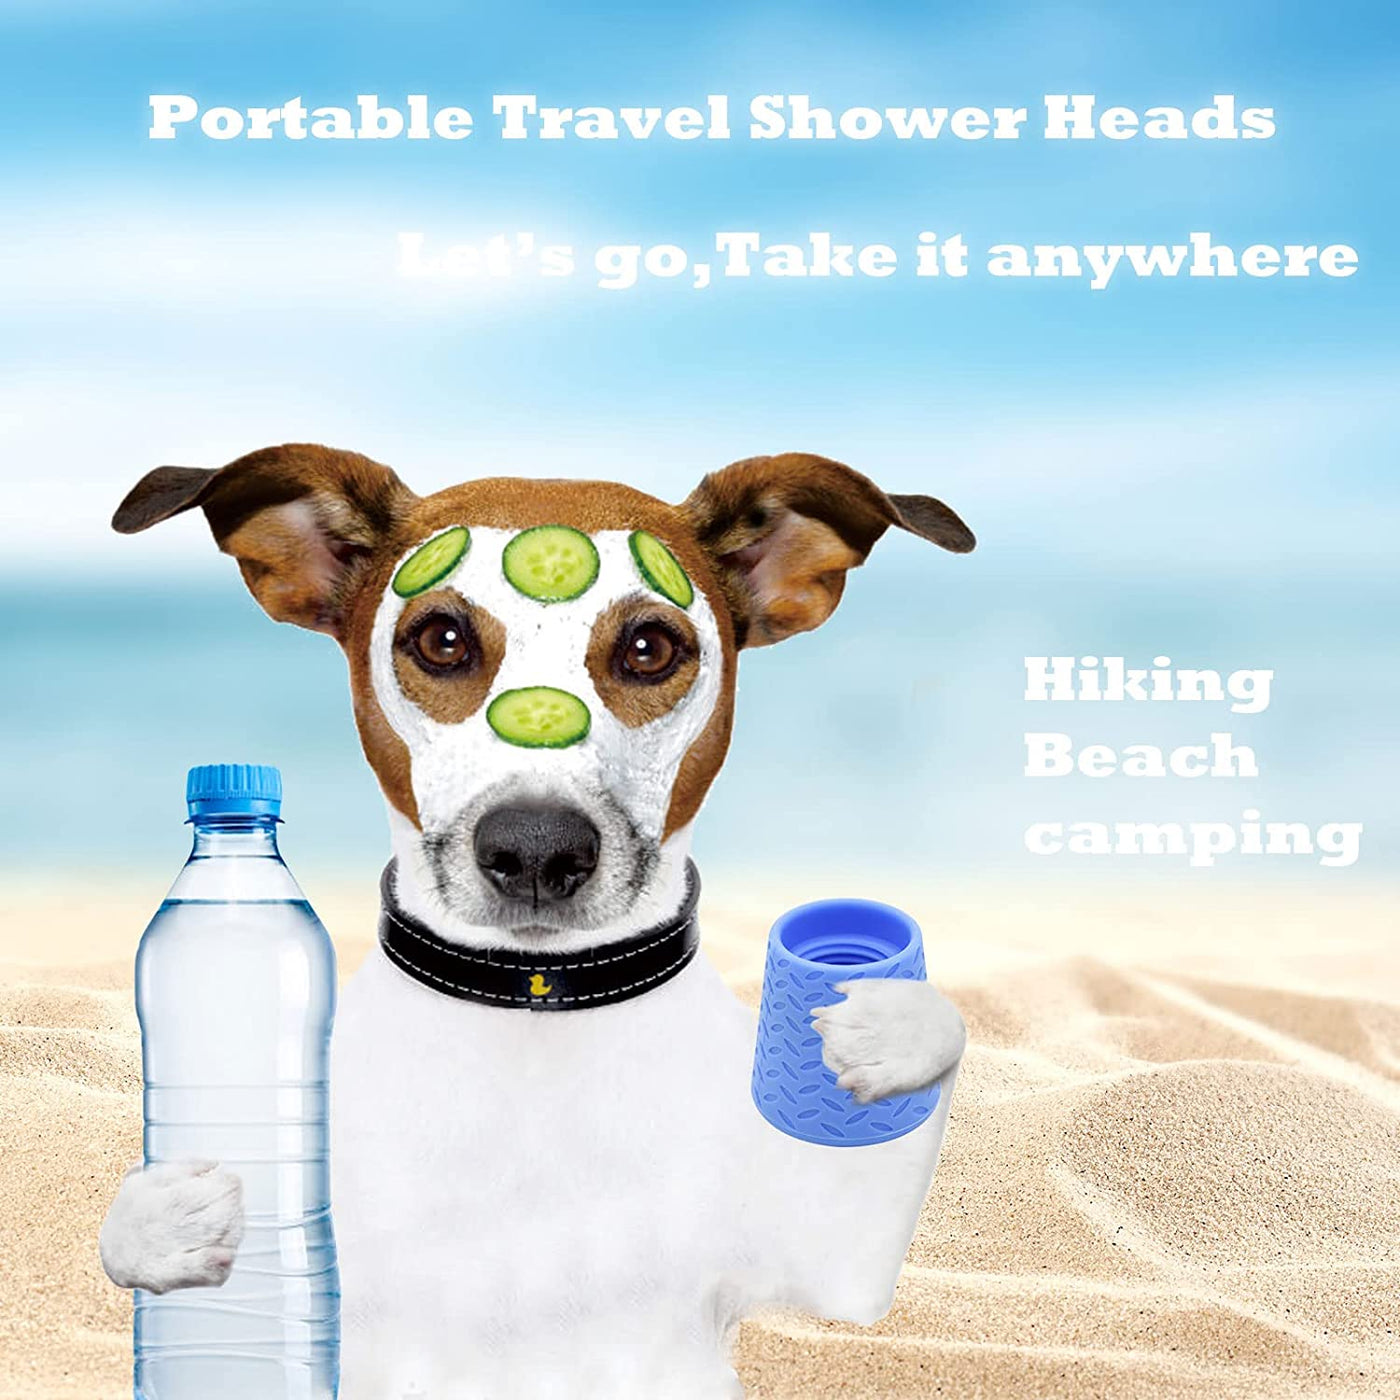  Silicone Dogs Shower Sprayer Head Attachment - Pet Shower Cap Sprinkler | Portable Outdoor Shower Heads for Camping, Hiking, Beach - Fits Most Plastic Mineral Water Bottle, 1 Pack Green